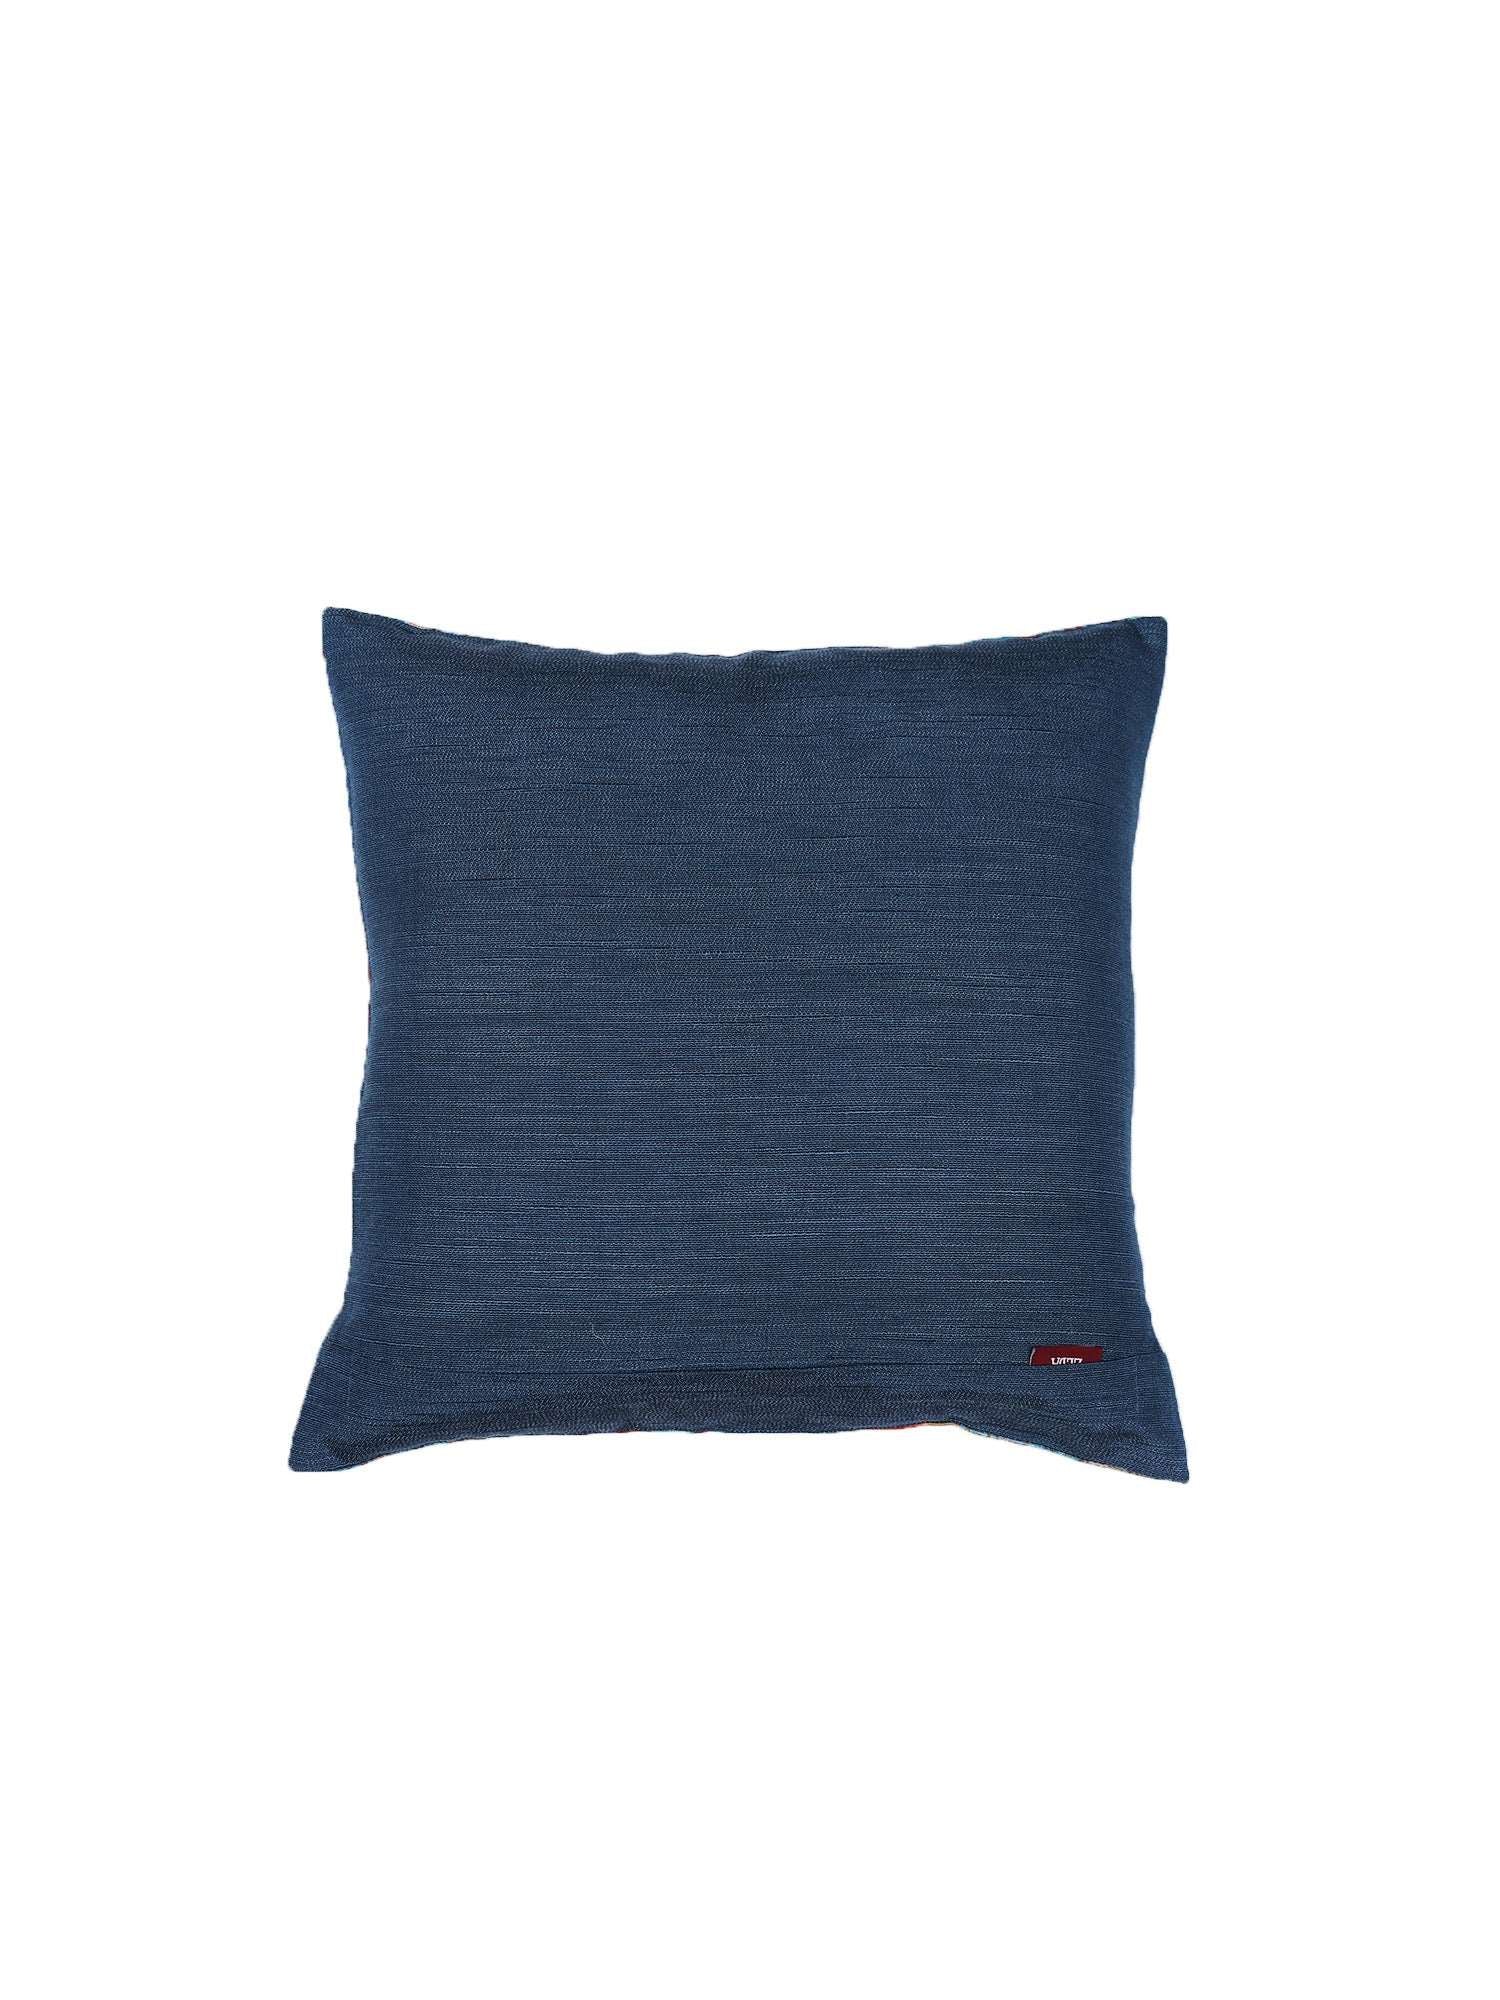 Cushion Cover for Sofa, Bed Poly Canvas Ikat Print | Navy Blue - 16x16in(40x40cm) (Pack of 1)